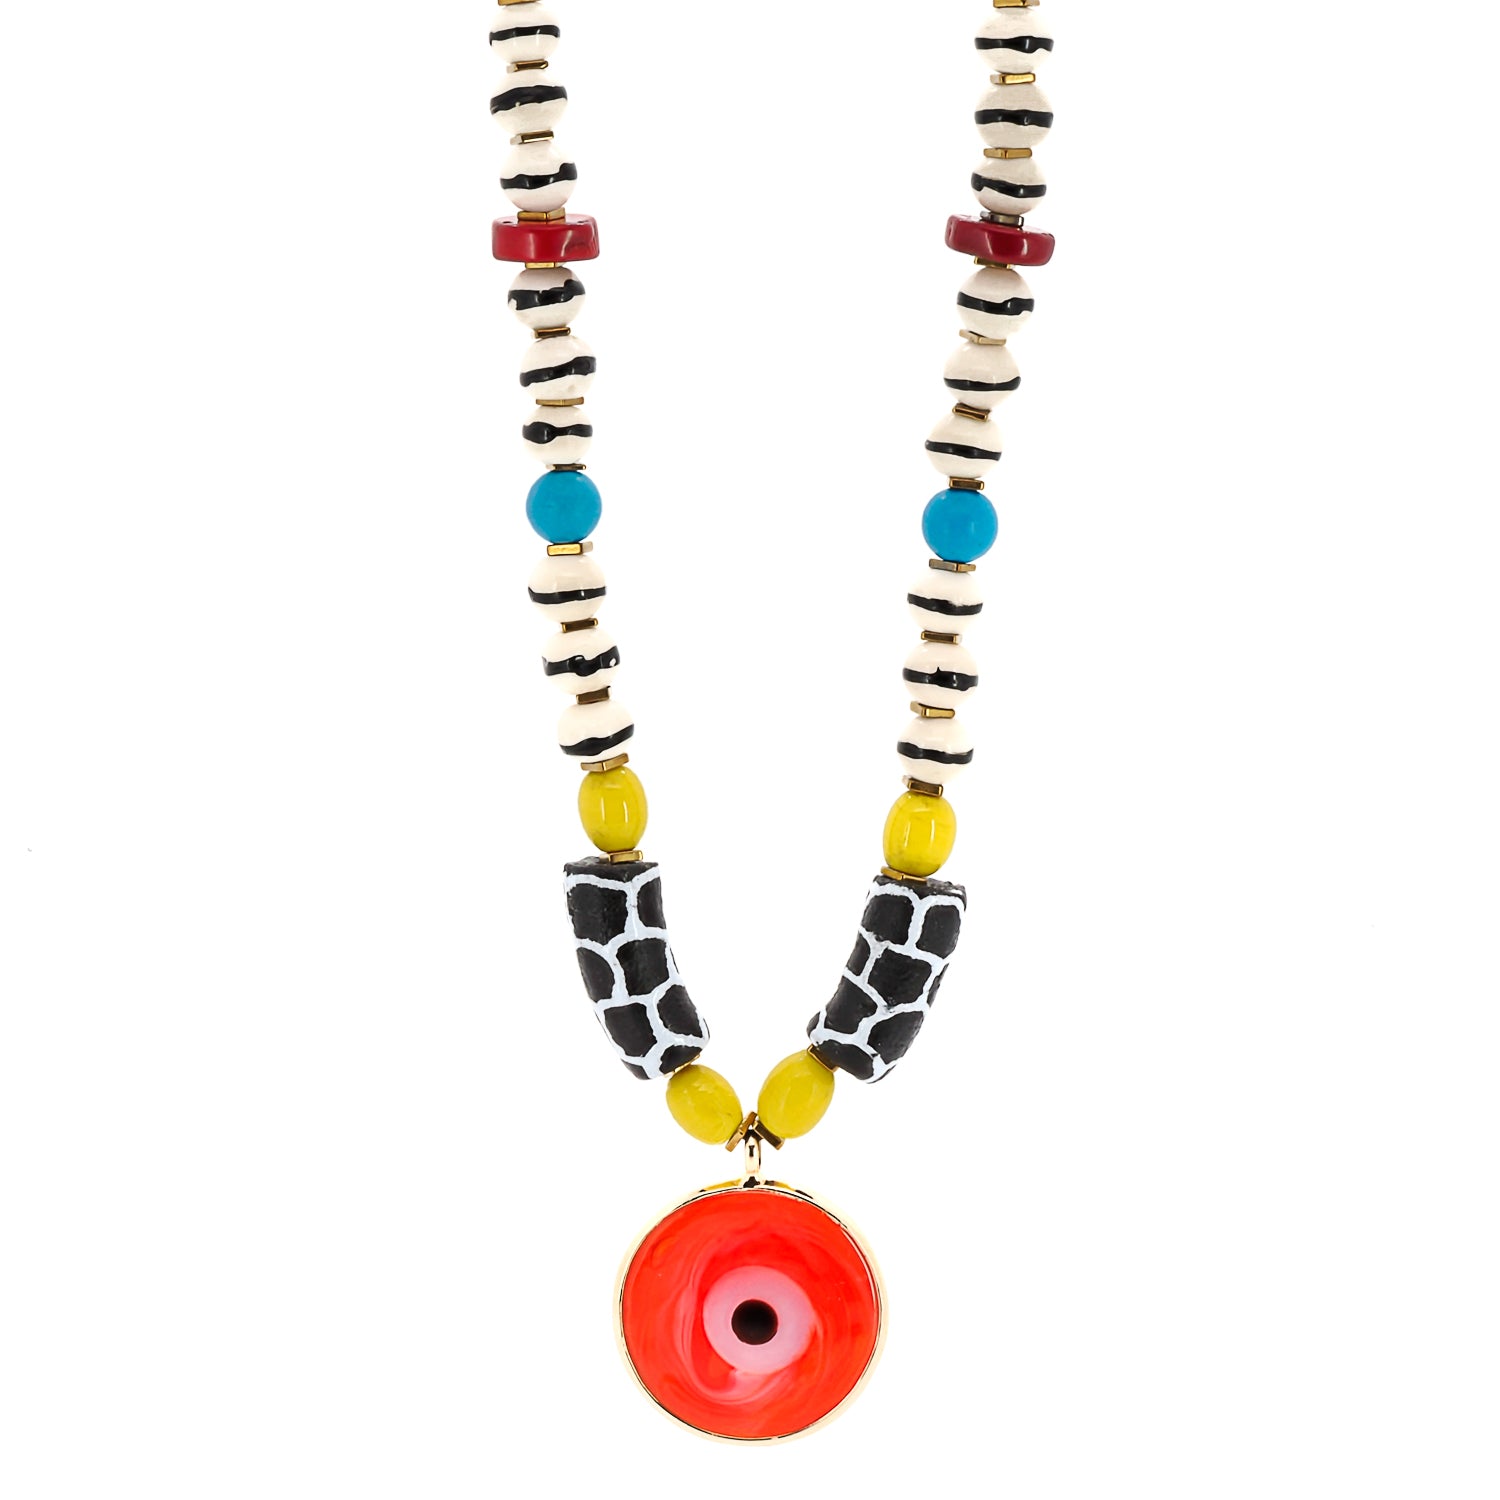 Close-up of the African Yellow Happiness Necklace showcasing the Nepal yellow beads and turquoise stones.